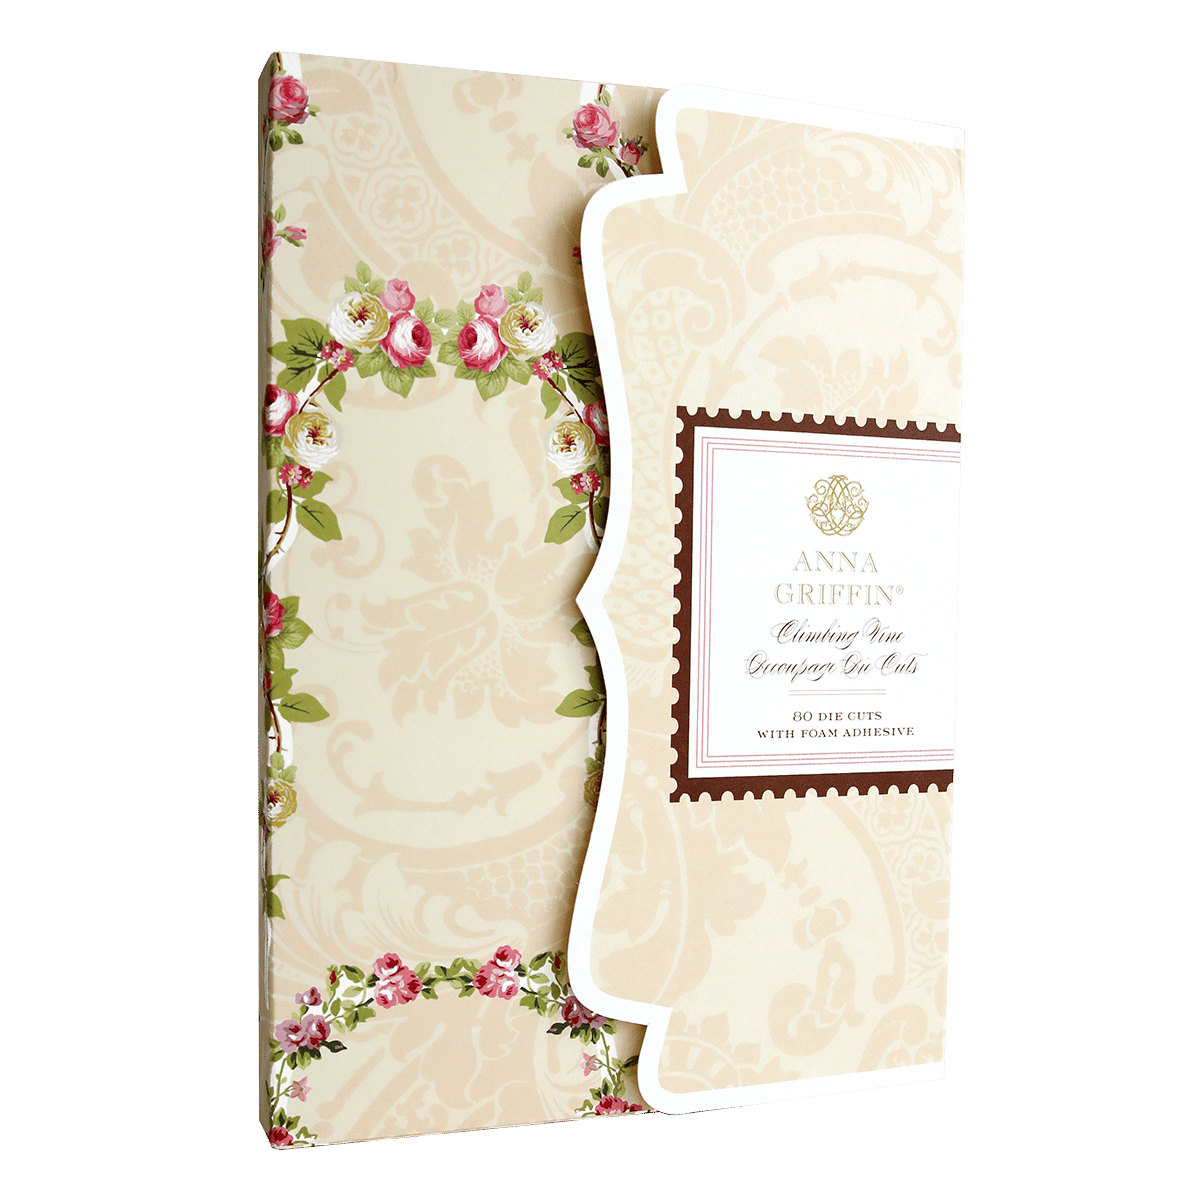 a wedding card with a floral design on it.